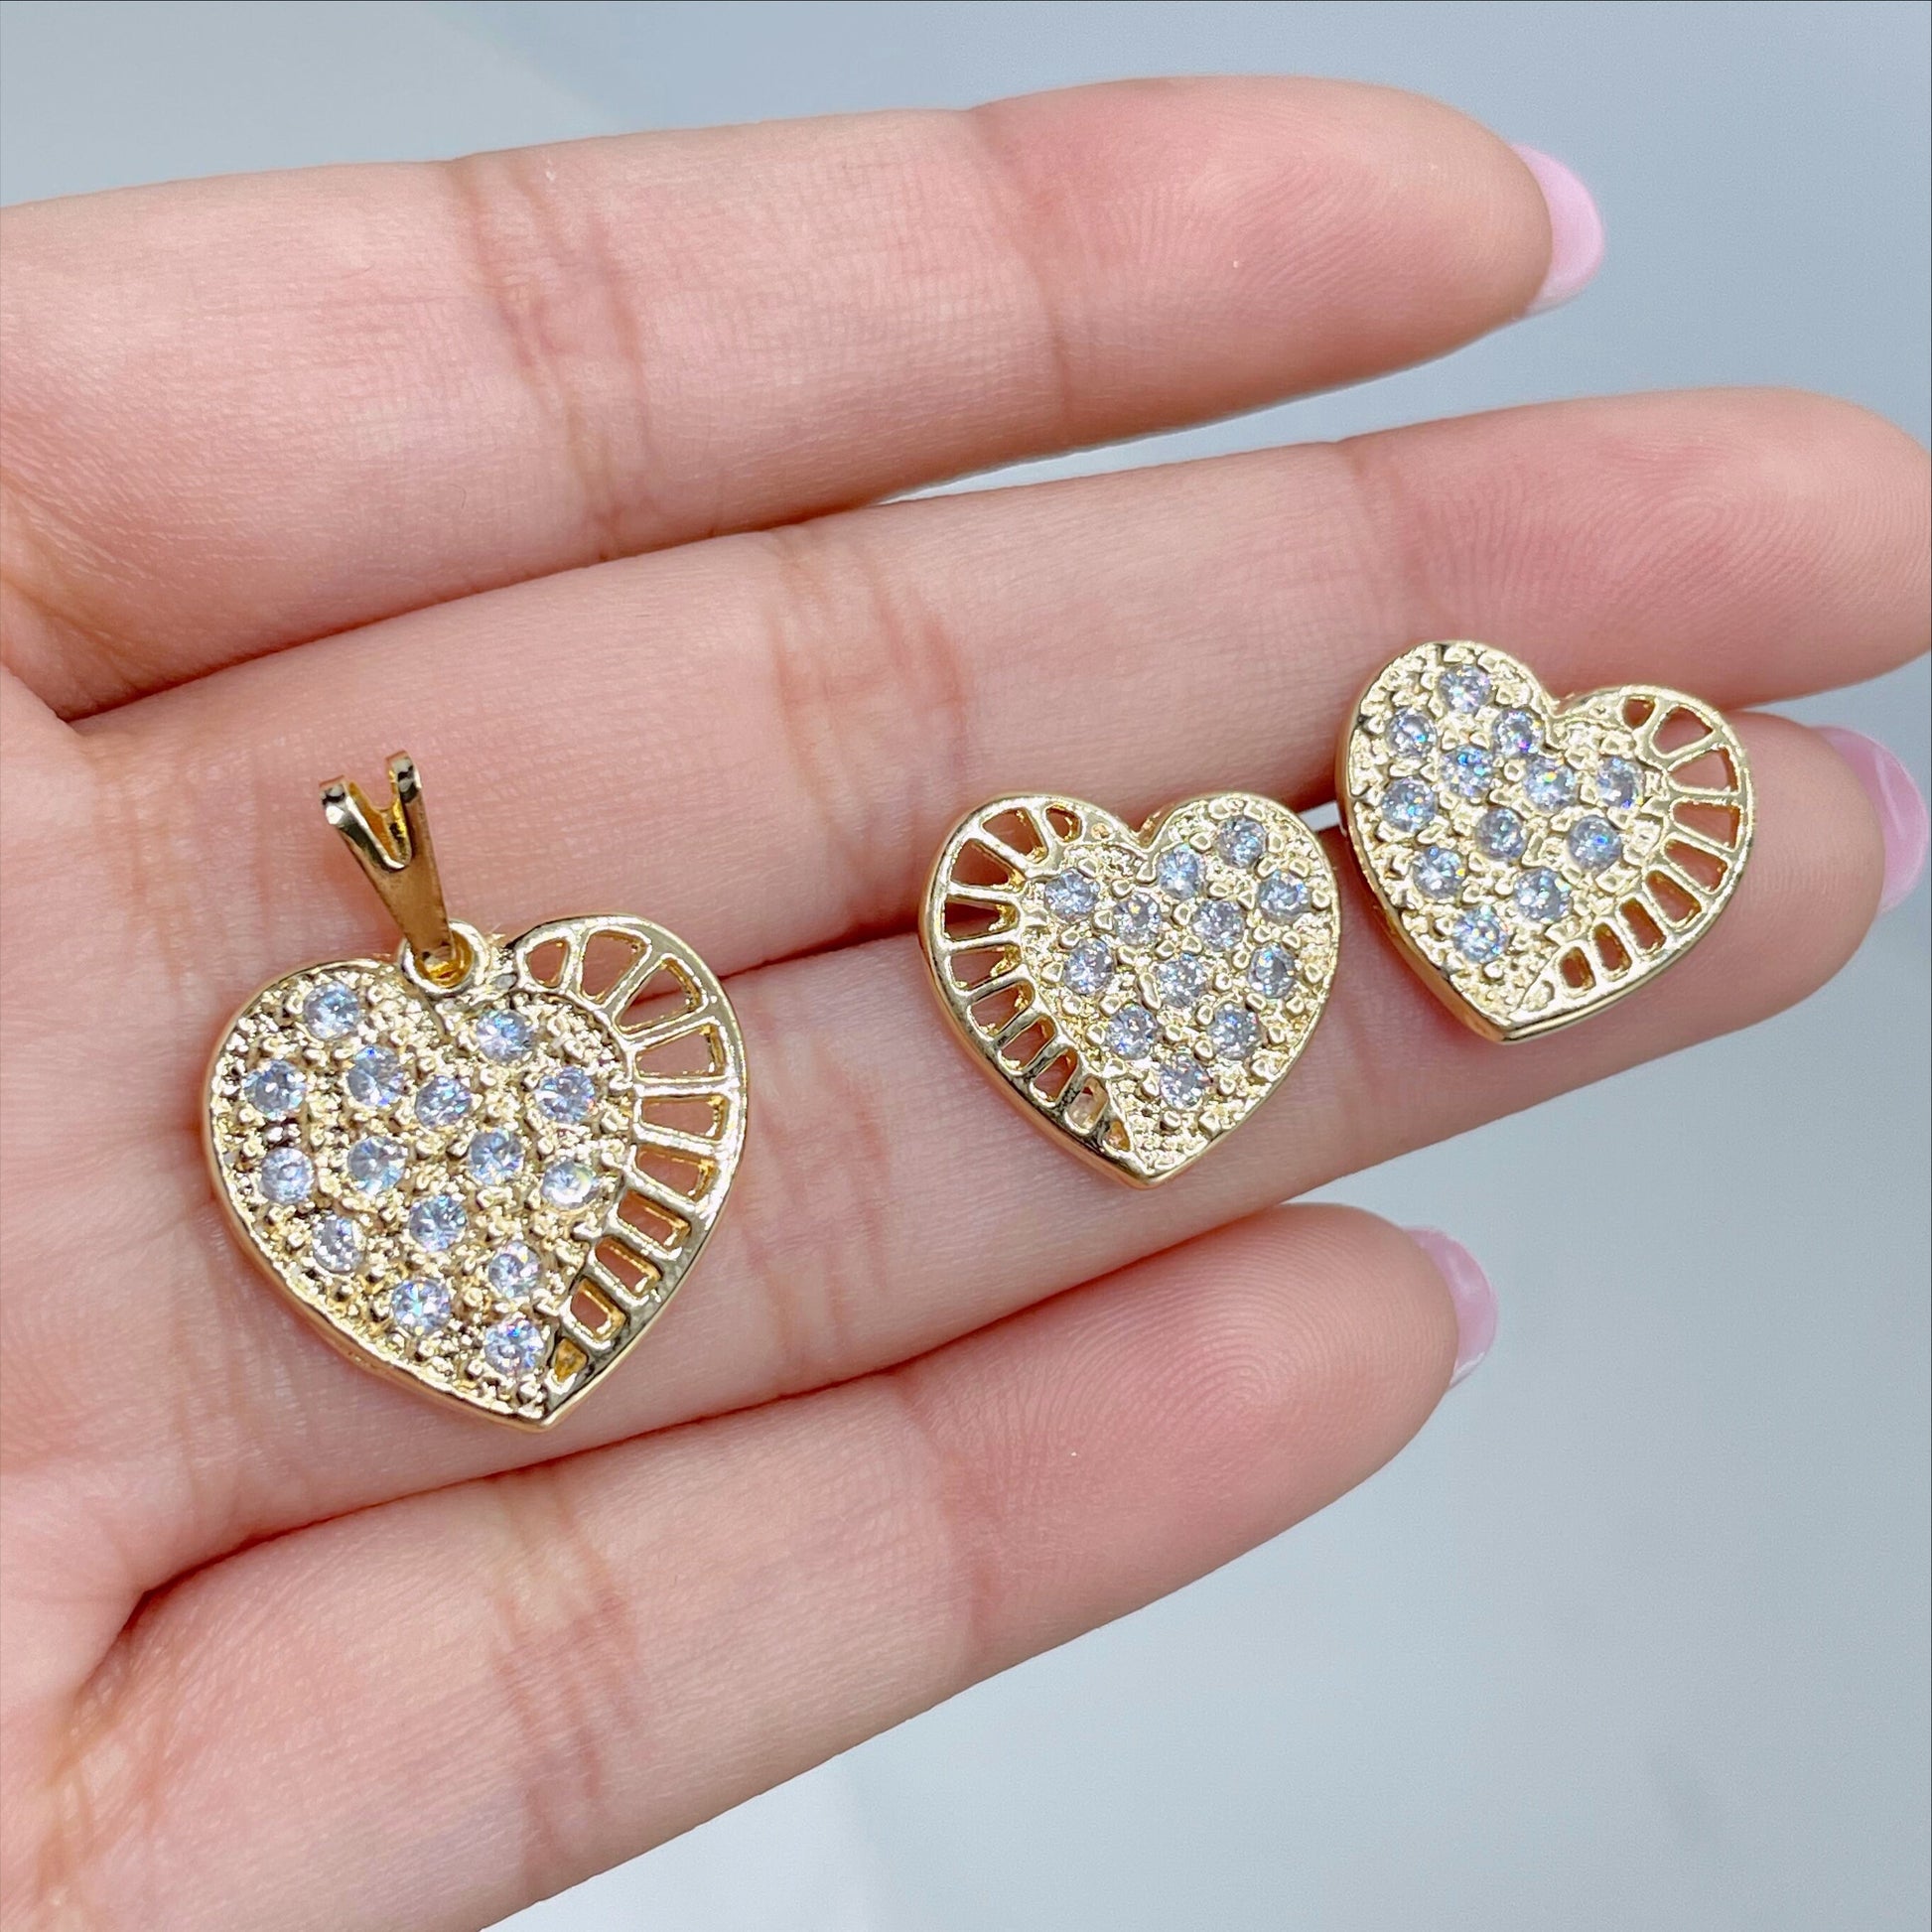 18k Gold Filled 2mm Curb Link Chain with Cubic Zirconia Heart Stud Earrings and Pendant Charms Set, Wholesale Jewelry Making Supplies